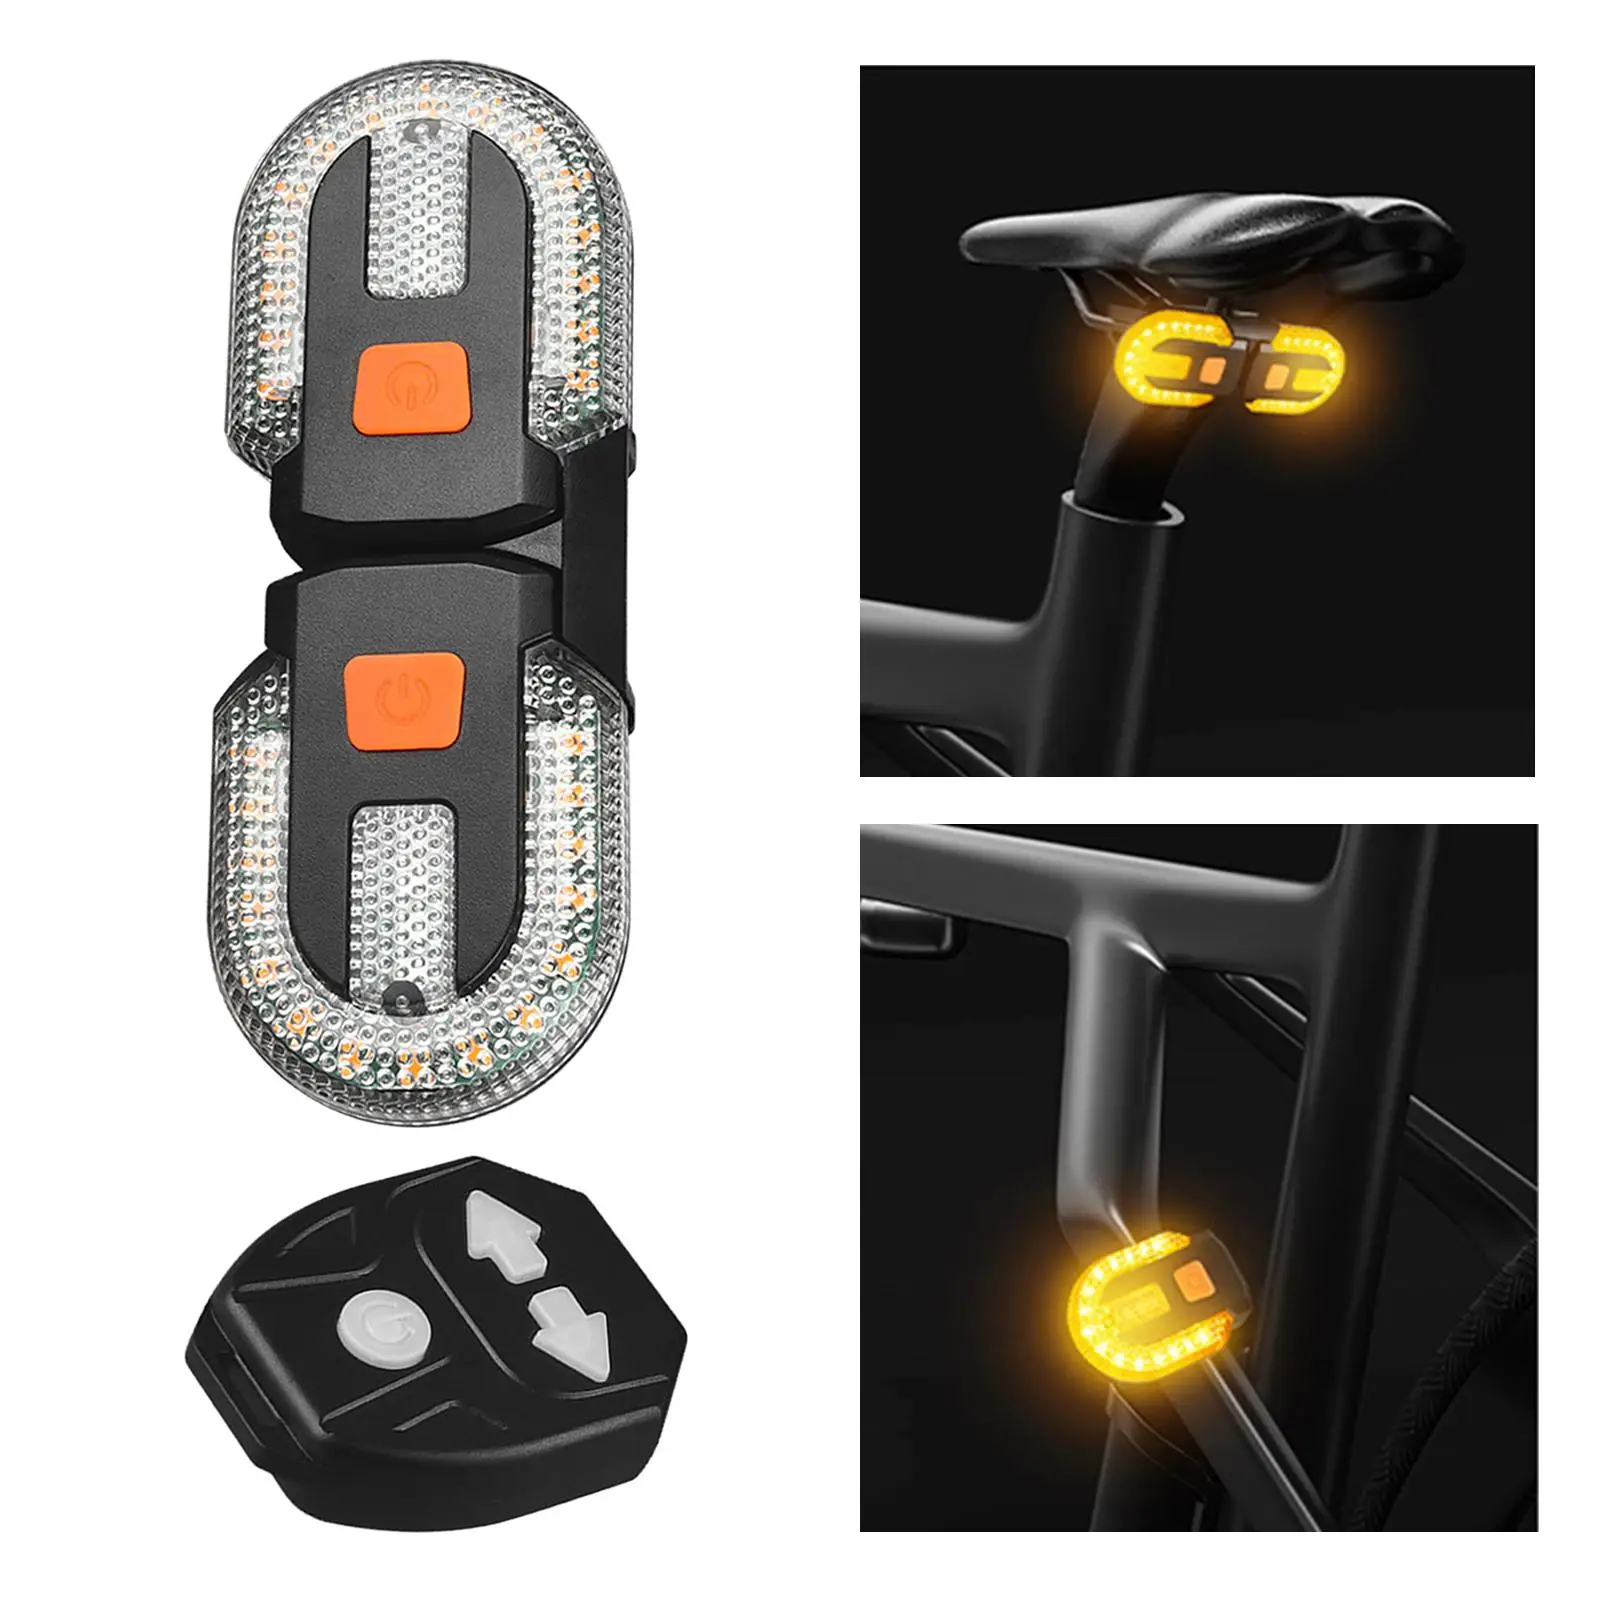 Detachable Bike Warning Tail Light USB Rechargeable with Turn Signals for Night Wireless Remote Control Bicycle Rear Light